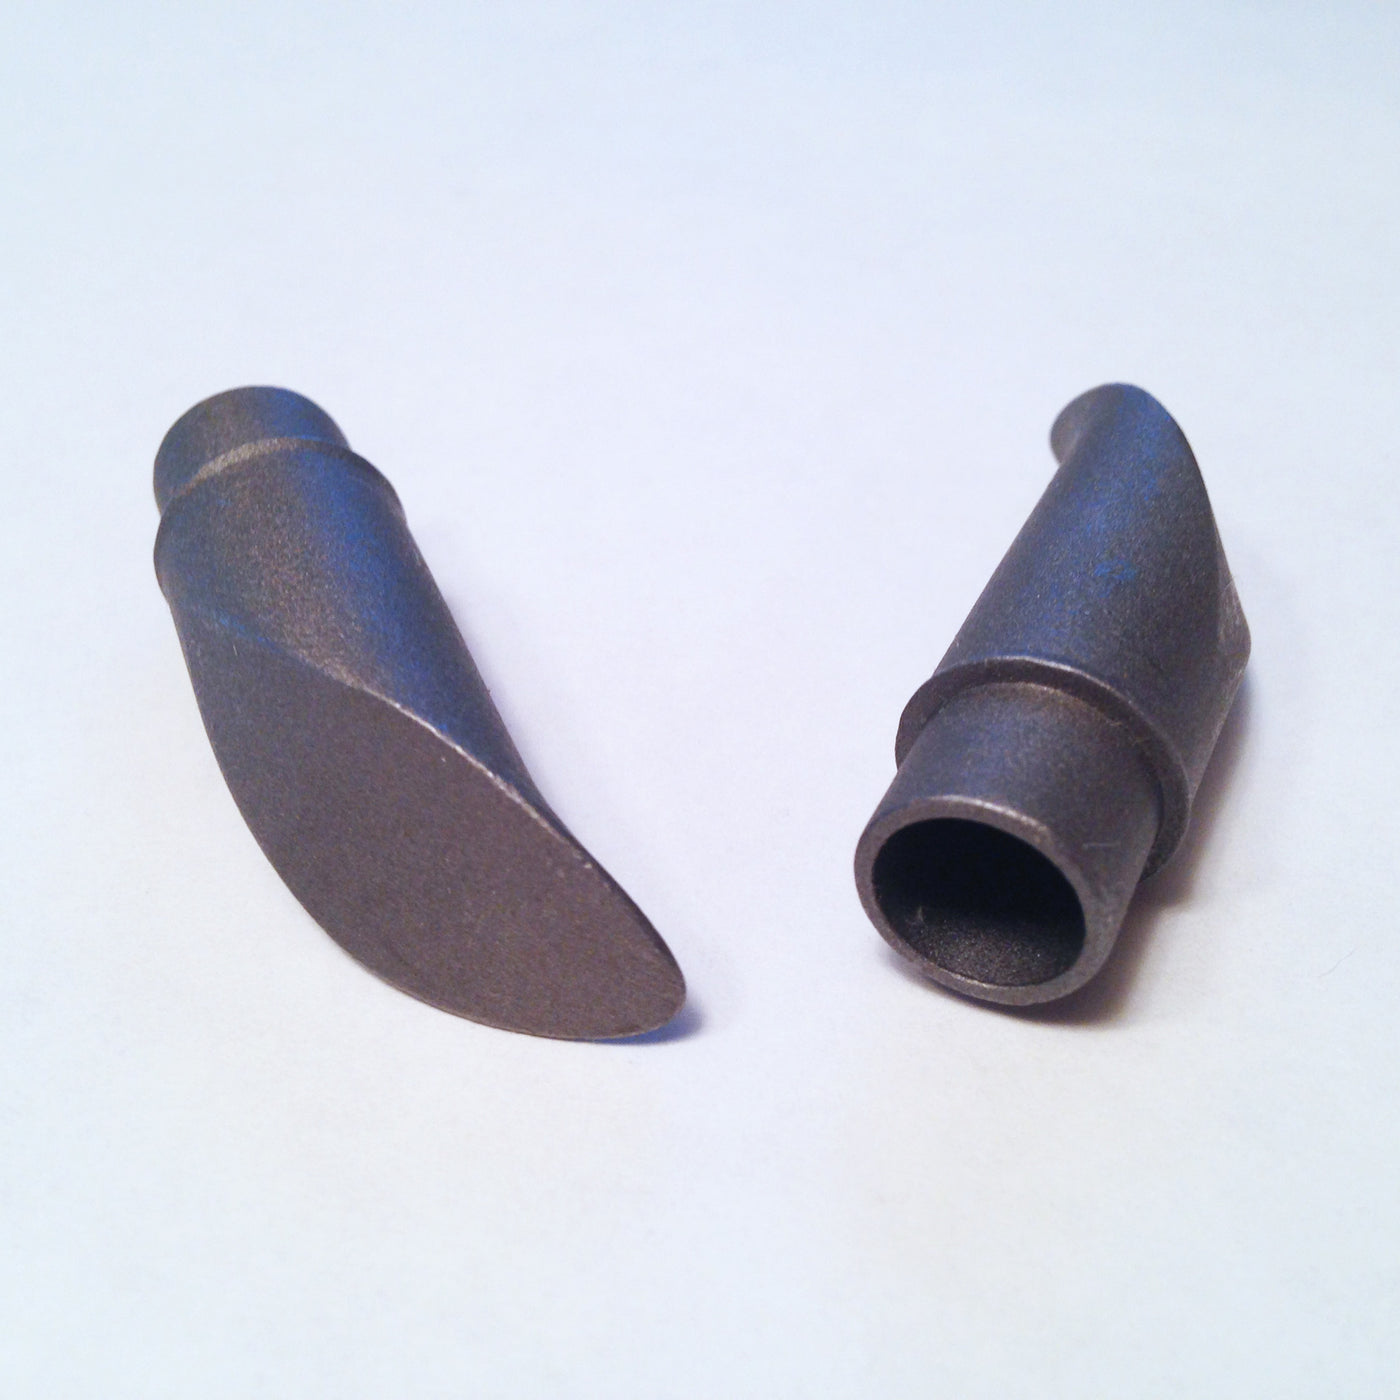 Seat stay tips for use with 12mm interior diameter tubes, curved